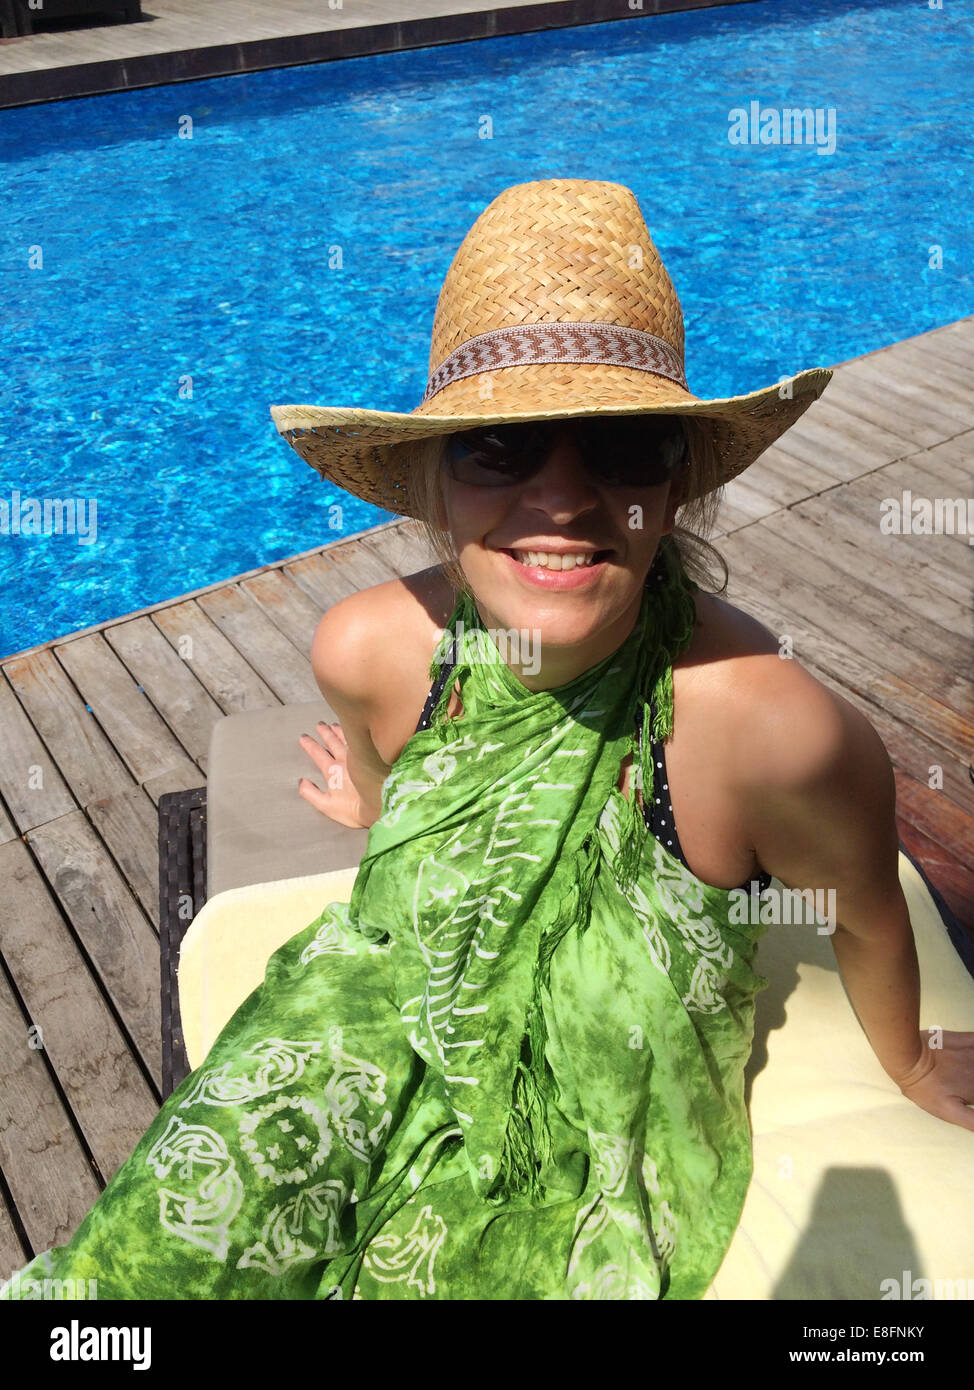 Smiling woman sitting on sun lounger by swimming pool Stock Photo